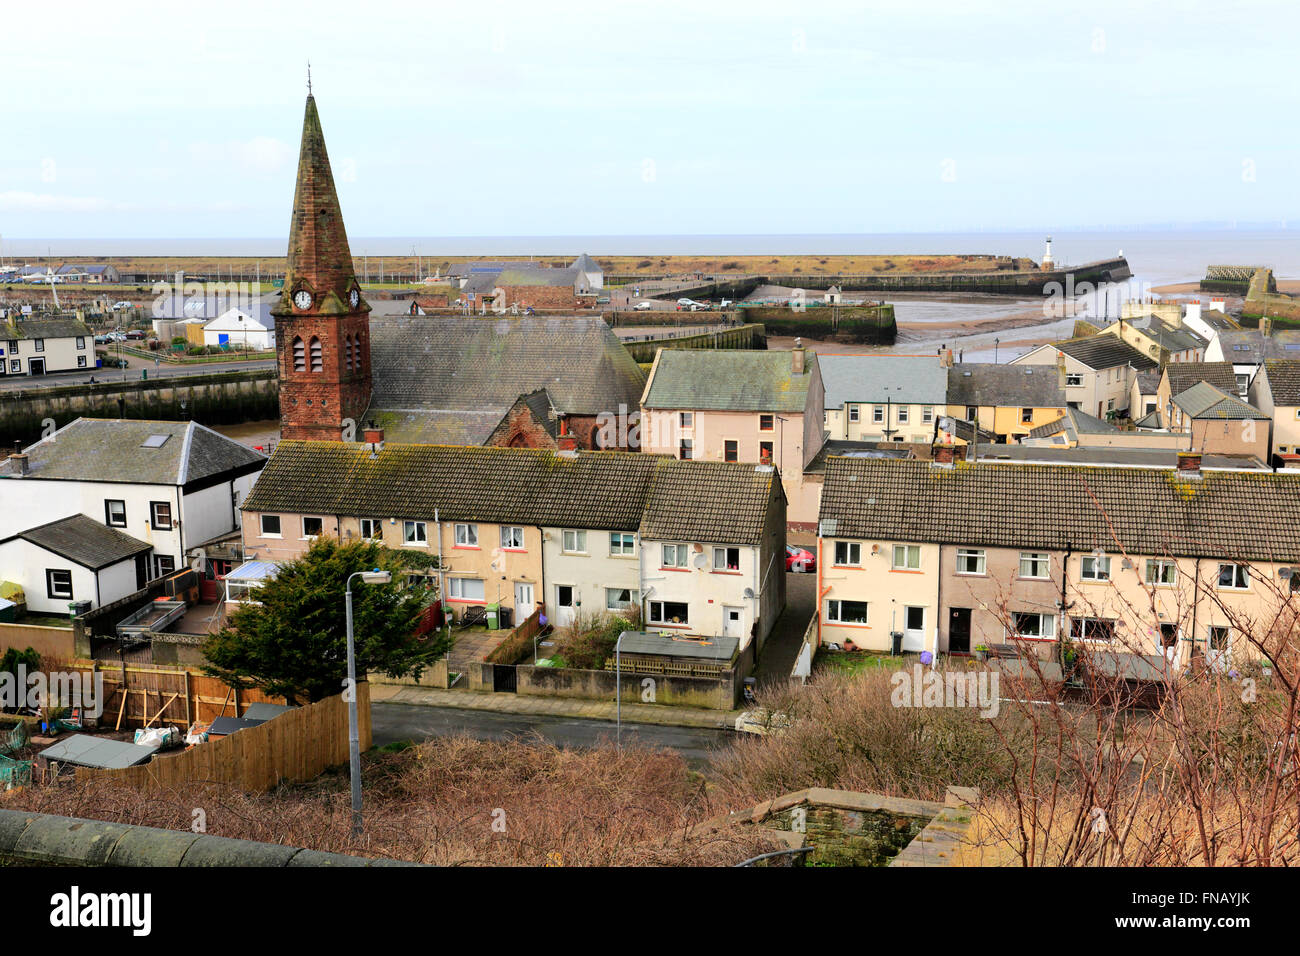 Overview of housing and buildings, Maryport town, West Cumbria, England, UK Stock Photo